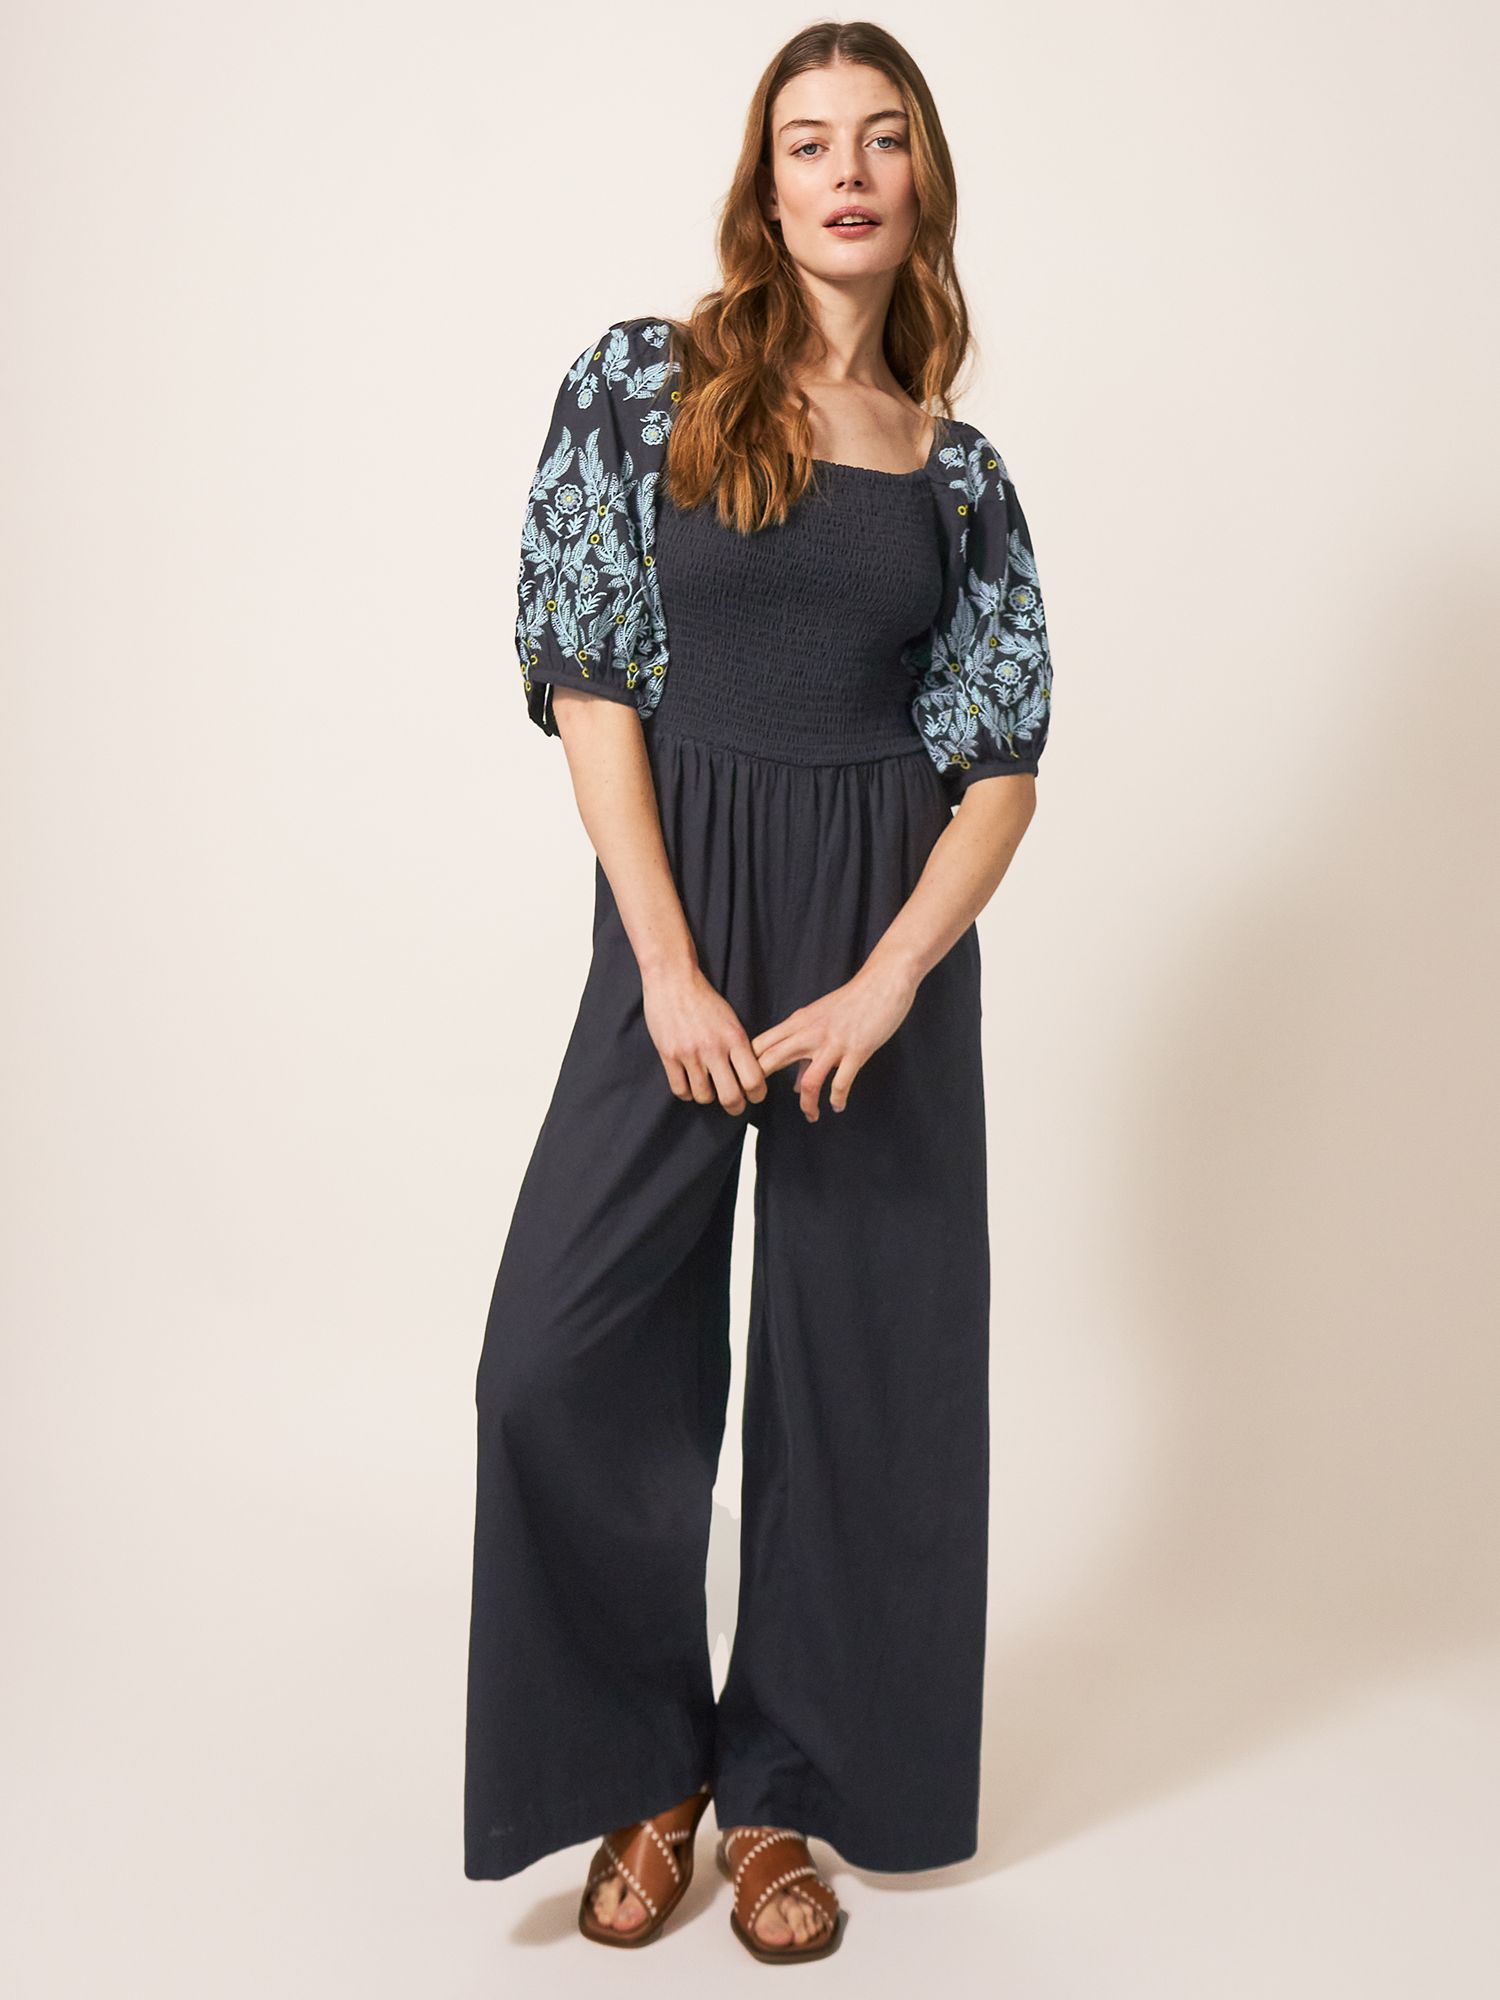 White Stuff Embroidered Sleeve Linen Blend Jumpsuit, Pure Black